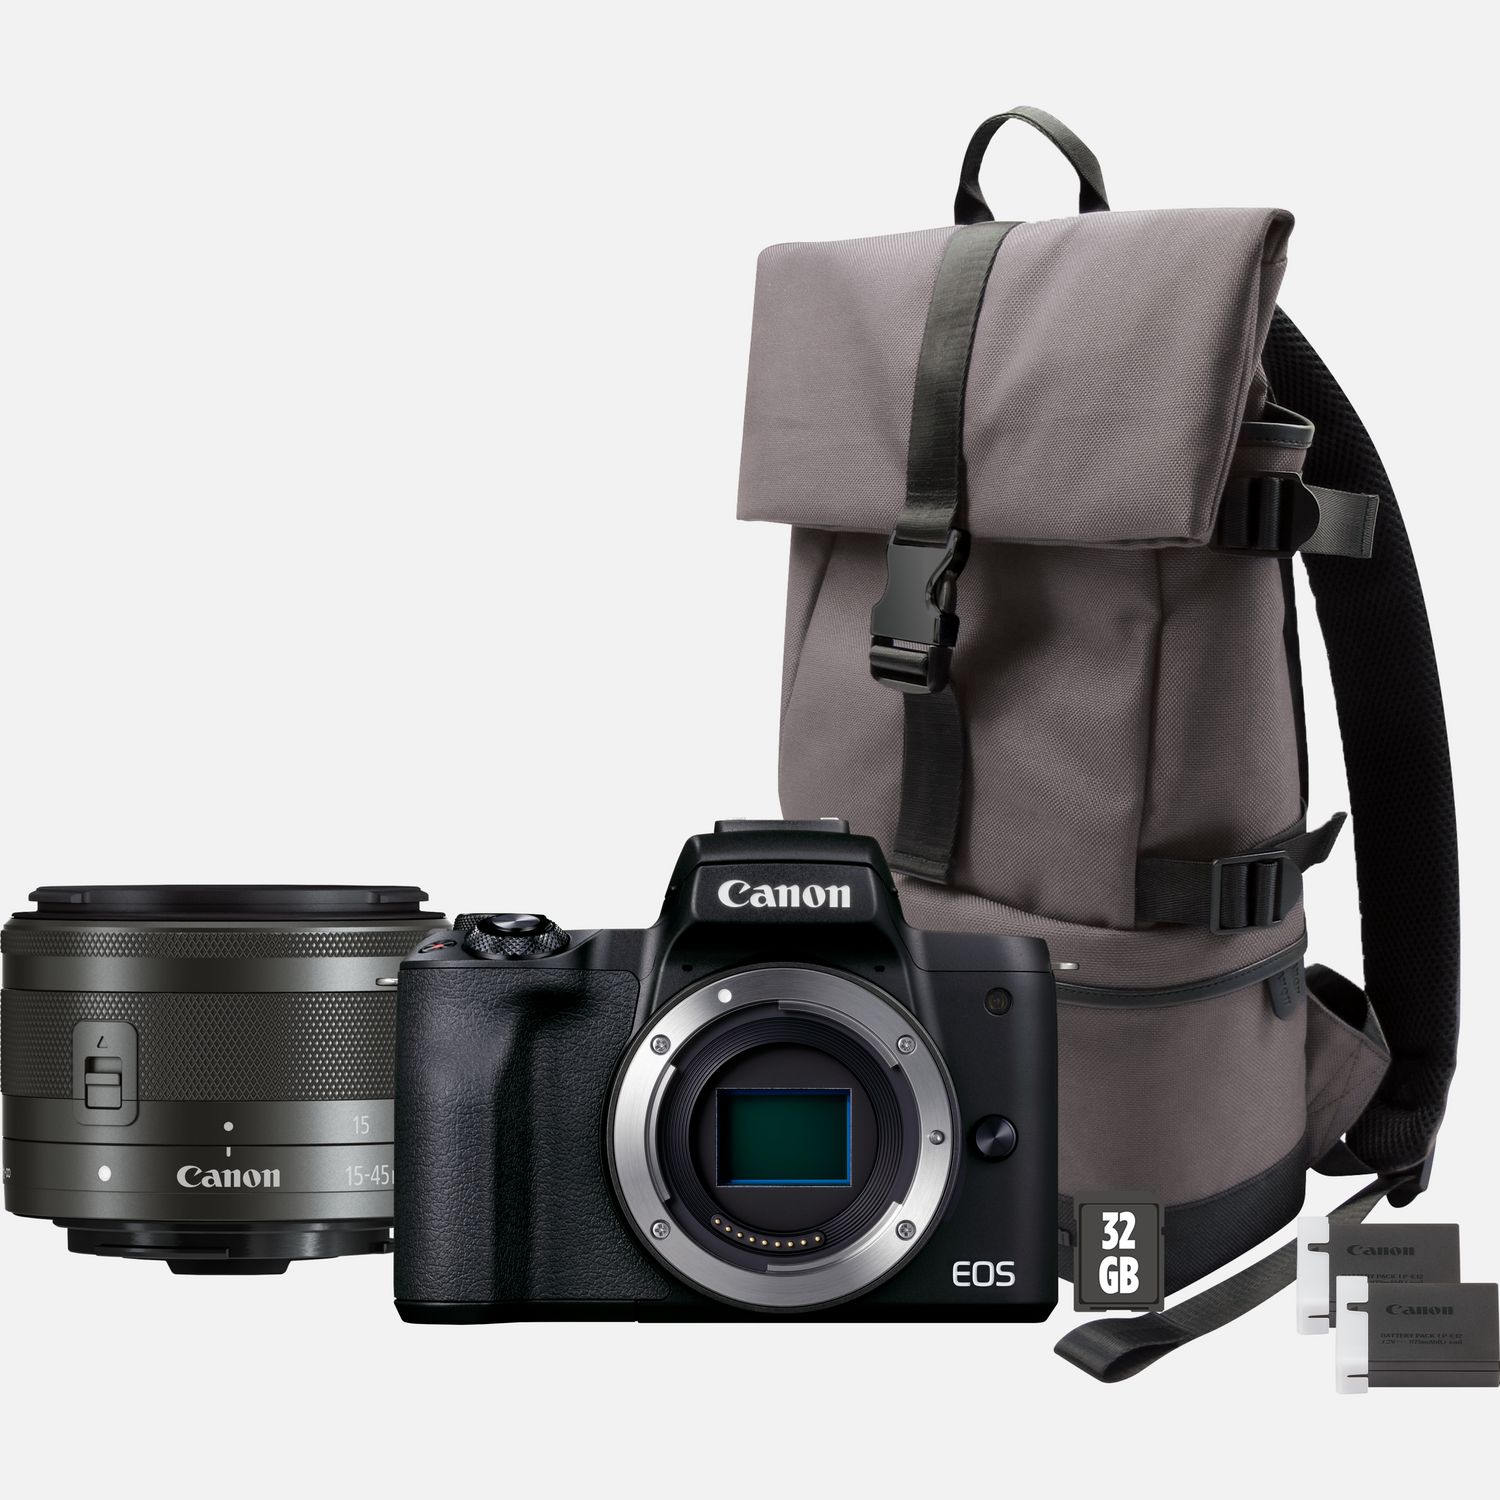 offset honing Port Canon EOS M50 Mark II-systeemcamera, zwart + EF-M 15-45mm IS STM-lens +  backpack + SD-kaart + reserveaccu in Wifi-camera's — Canon Nederland Store